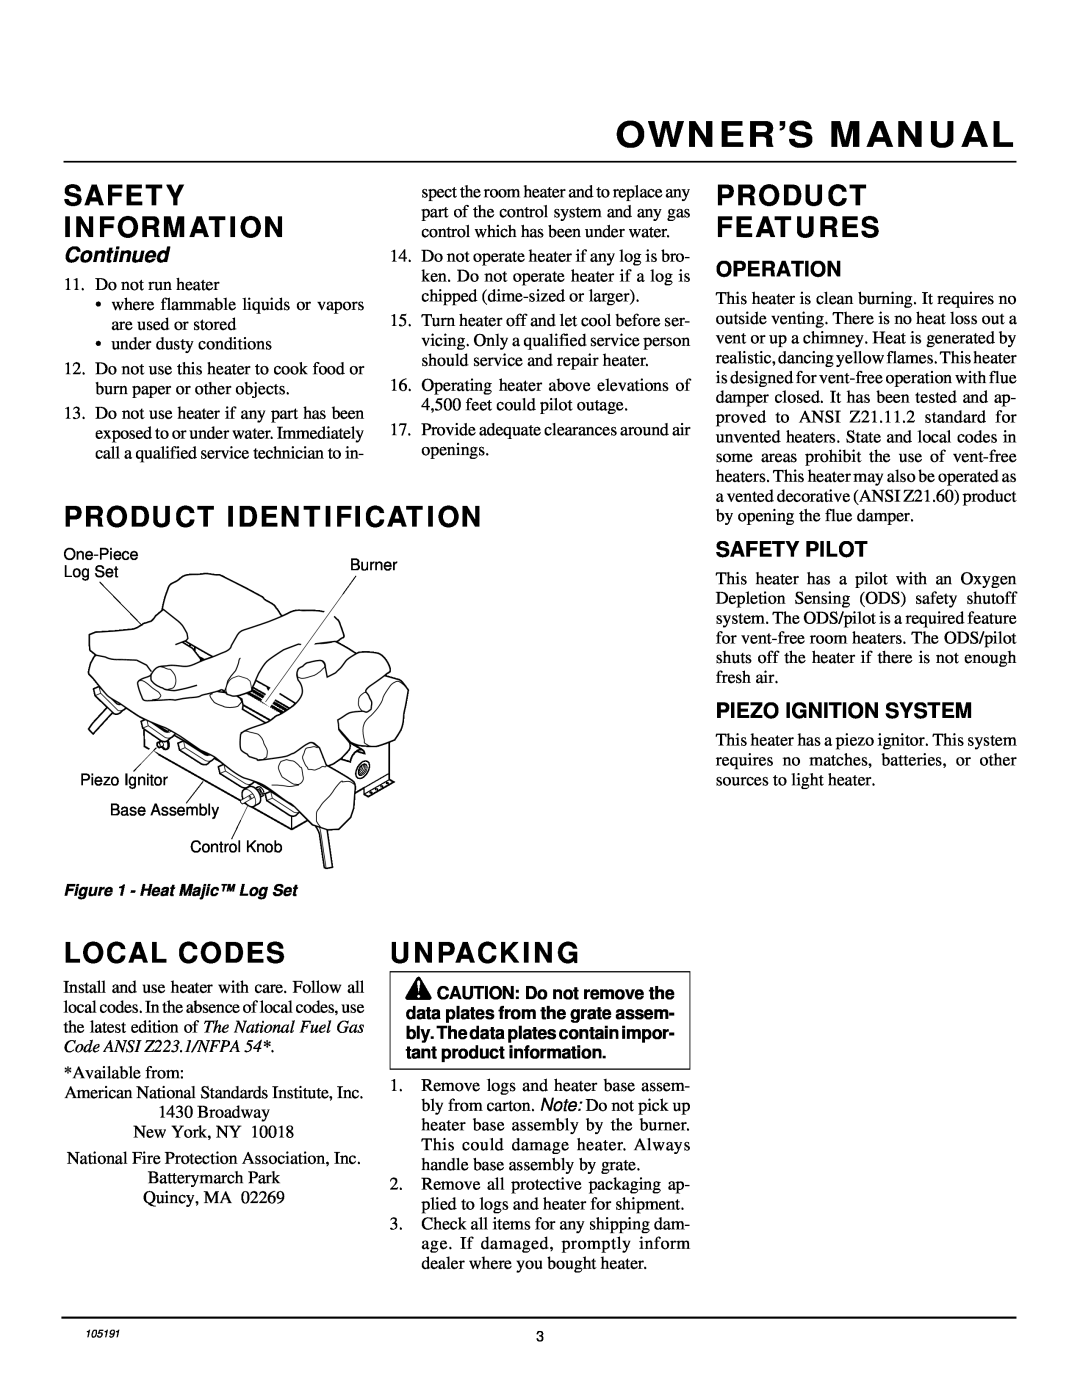 Desa FVF30N Owner’S Manual, Product Features, Product Identification, Local Codes, Unpacking, Continued, Operation 